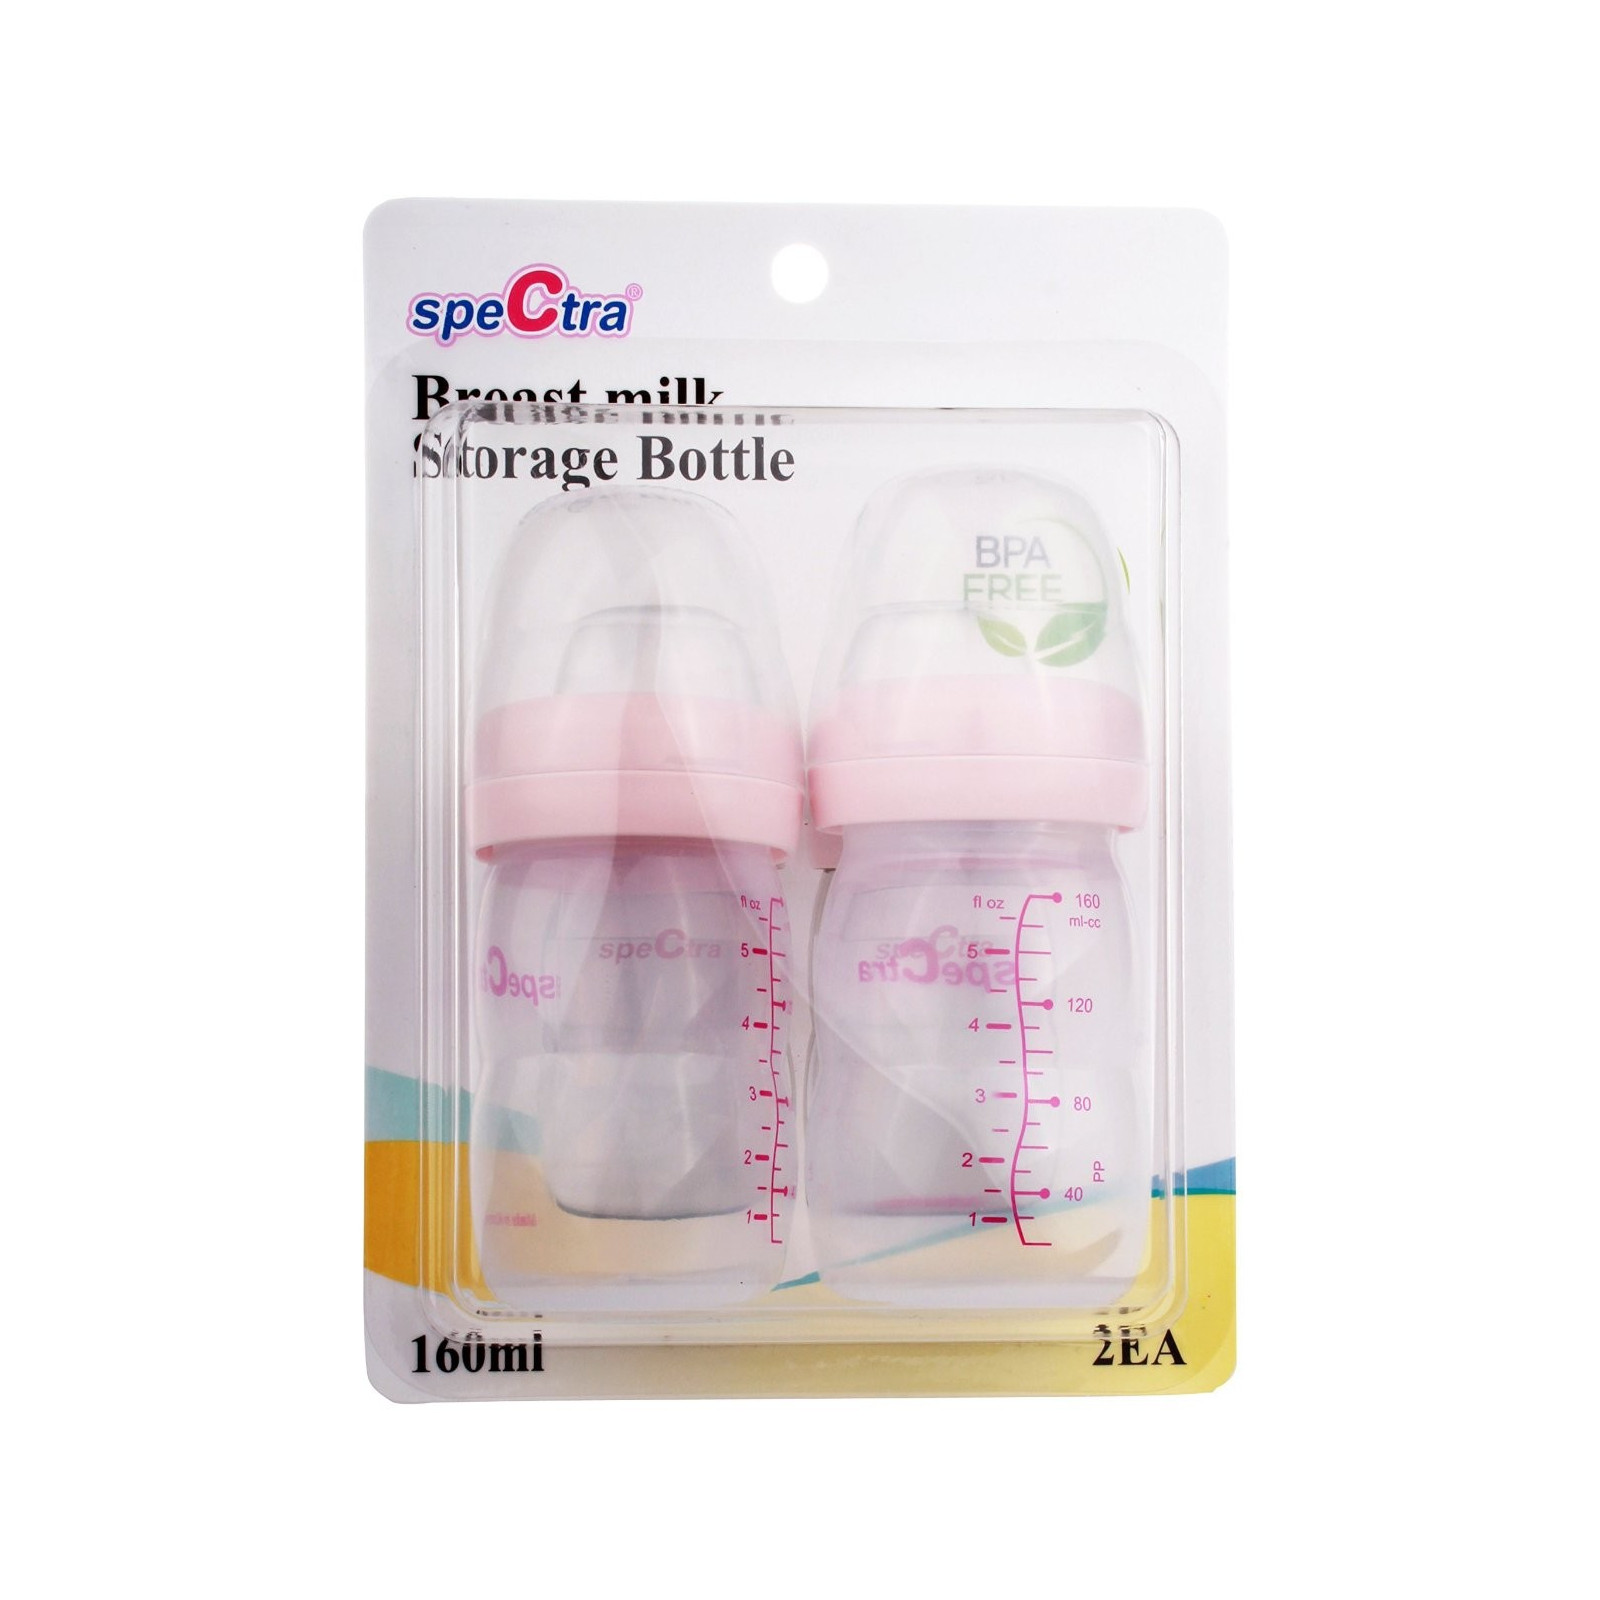 S2 M1 Include 2 Nipples For Bottle ORIGINAL SpeCtra Breast Milk Storage Bottle S9 Made to fit Spectra Breast Shield or Flange made for SpeCtra Breast Pumps S1 5 FL OZ/160ml 2 Pack PINK 